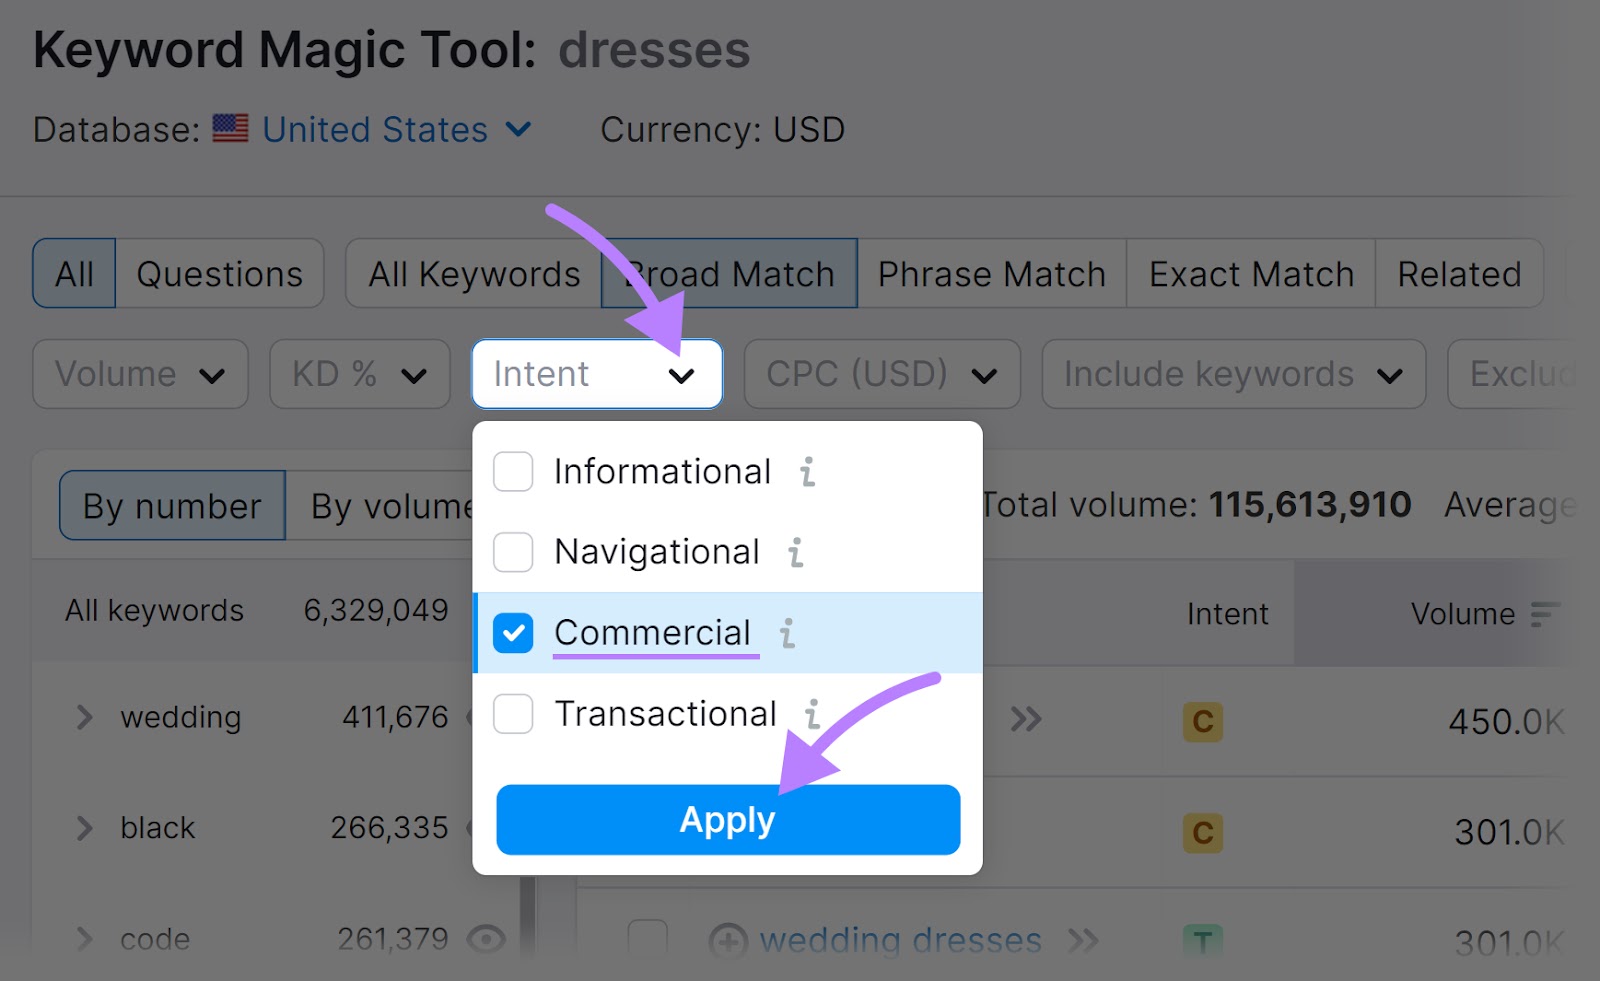 Filter keywords by the commercial search intent